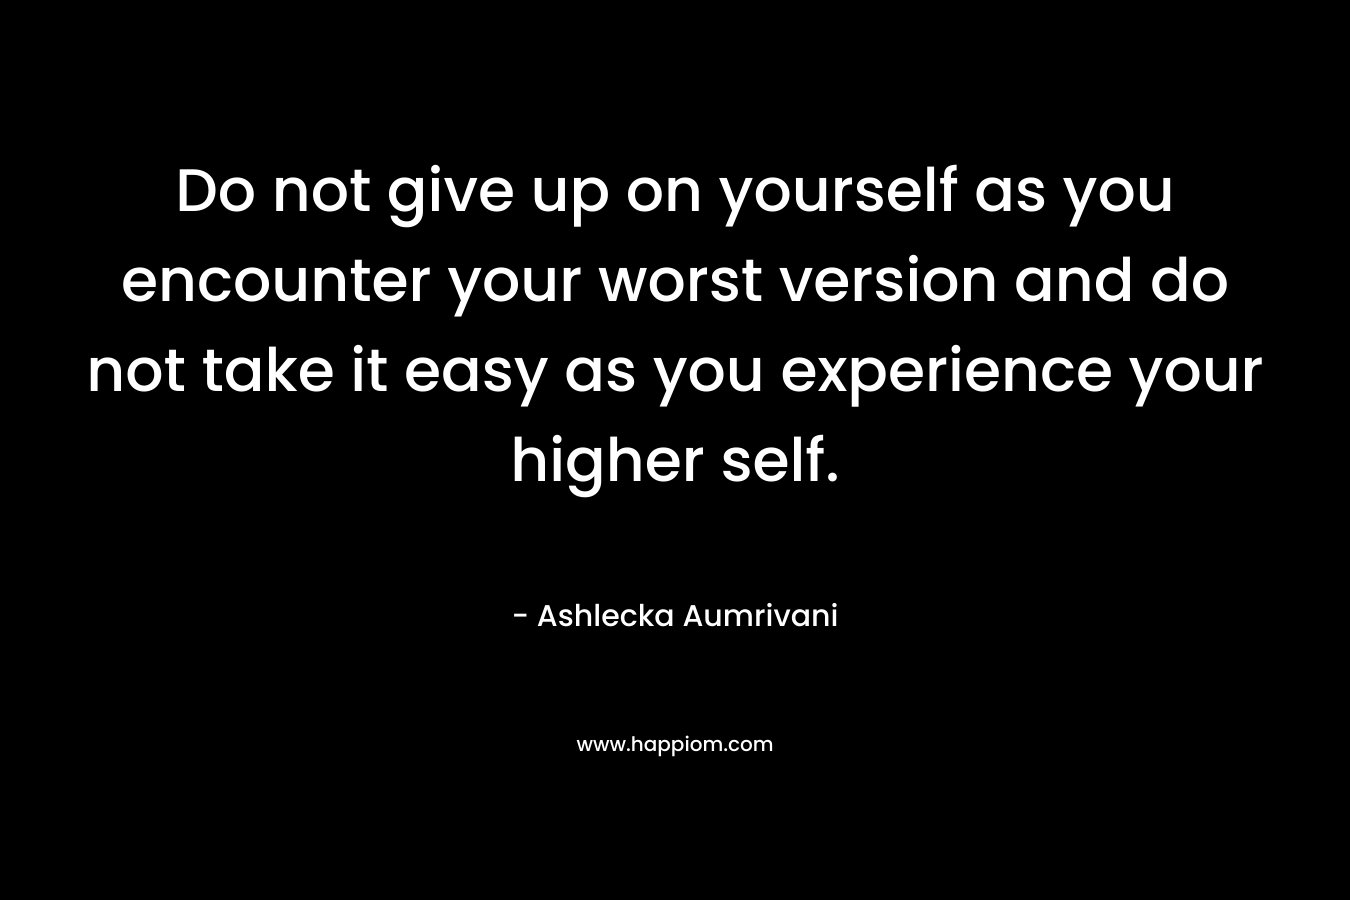 Do not give up on yourself as you encounter your worst version and do not take it easy as you experience your higher self.